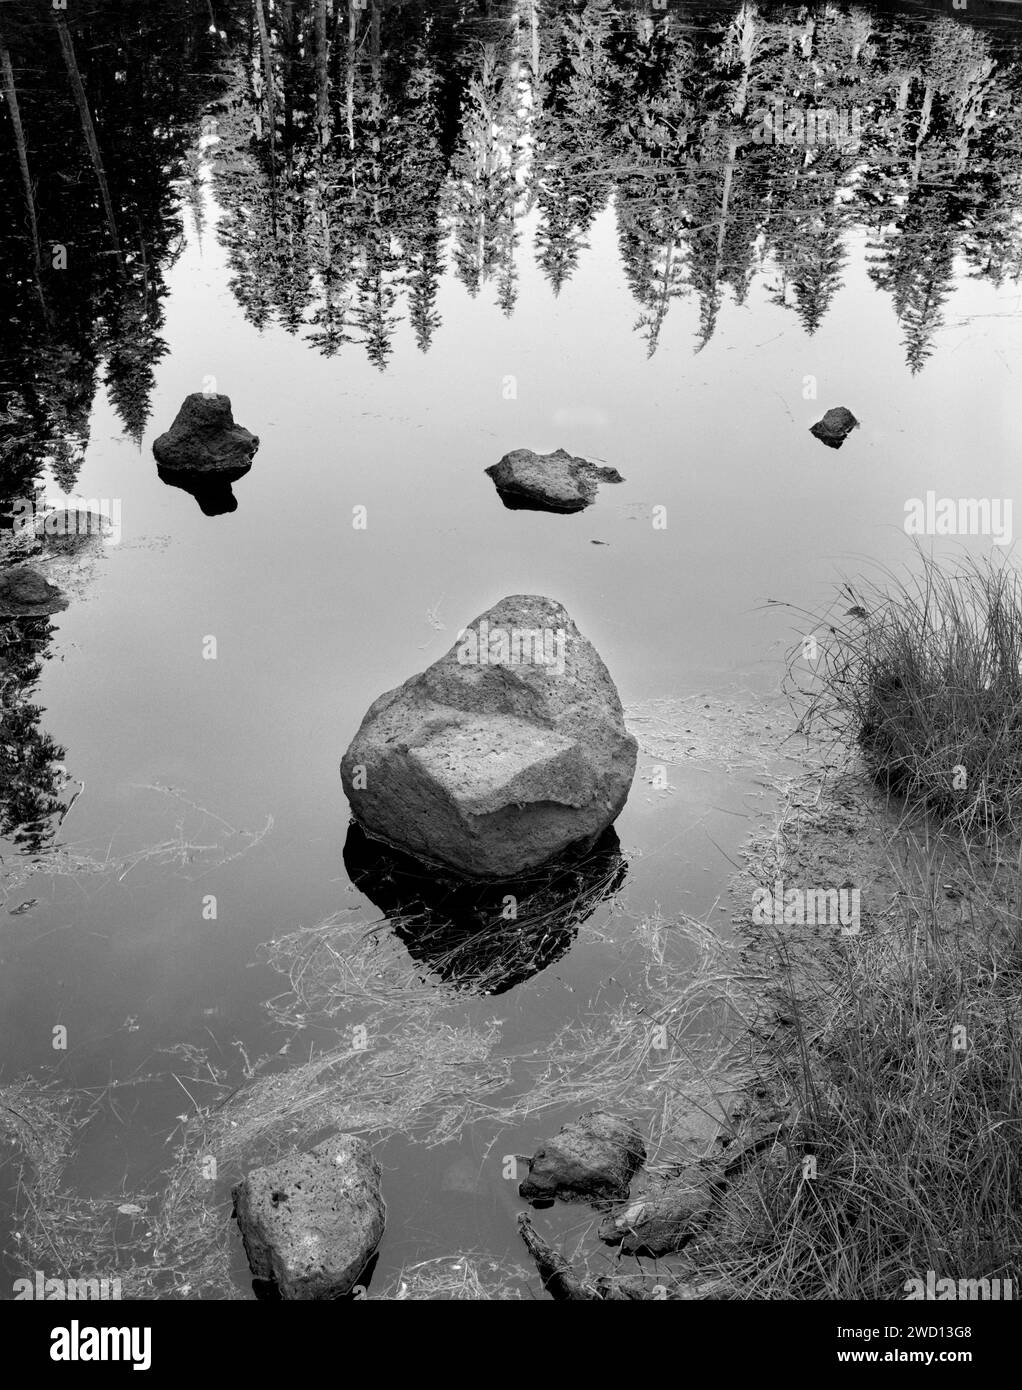 BW01130-00....WASHINGTON - Rocks and trees reflected on a small tarn in the Clearwater Wilderness, Mount Baker-Snoqualmie National Forest. Stock Photo